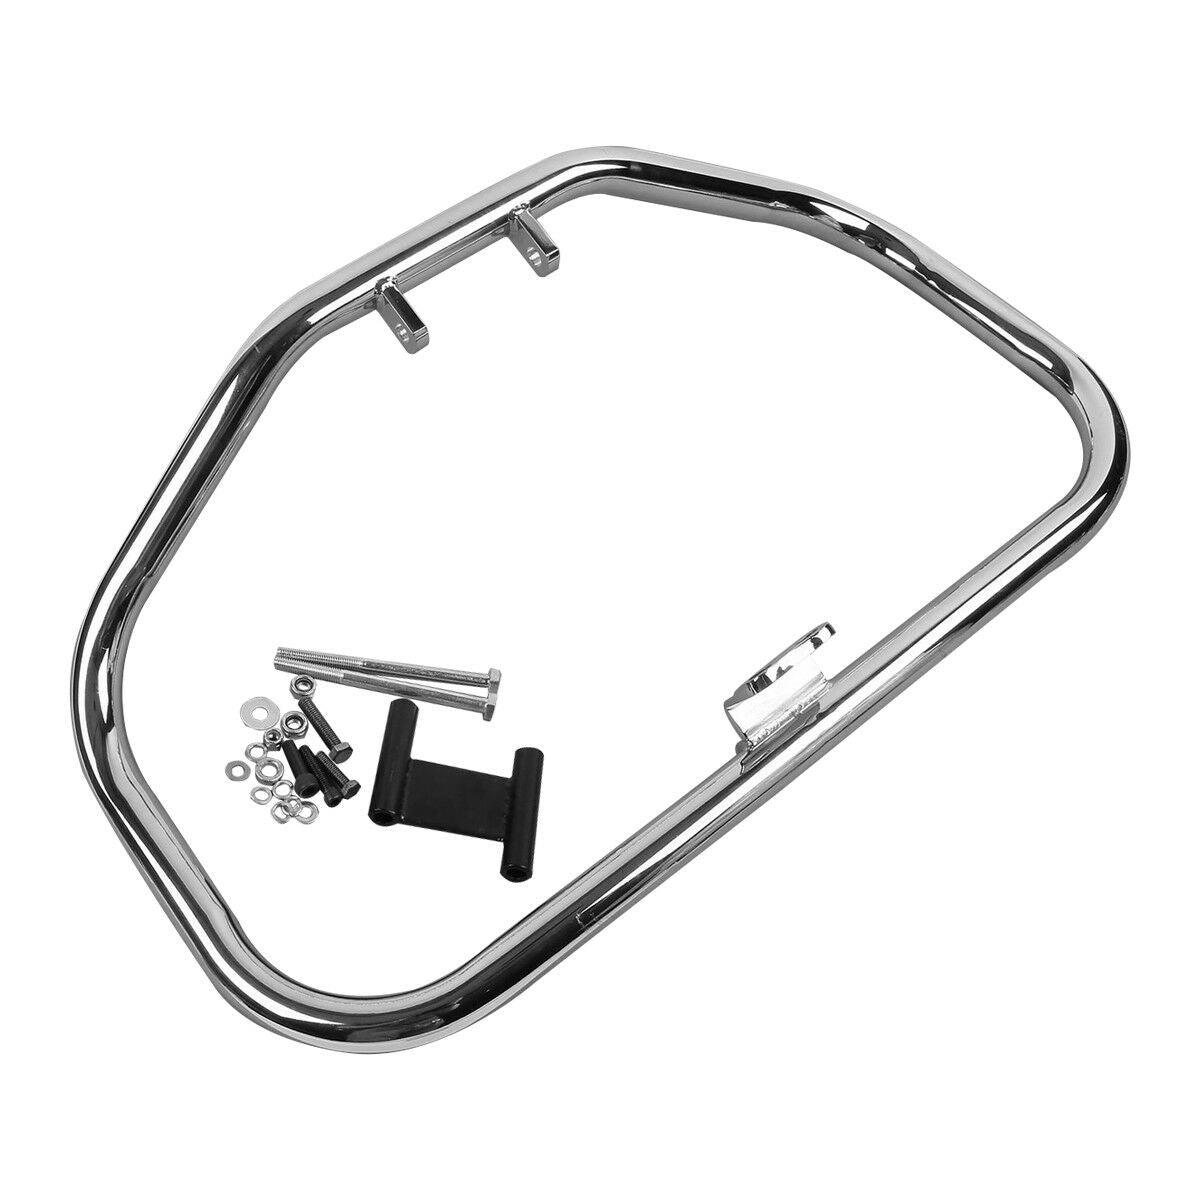 Chrome Engine Guard Crash Bar Fit For Harley Sportster 883 1200 XL XR 1984-2003 - Moto Life Products